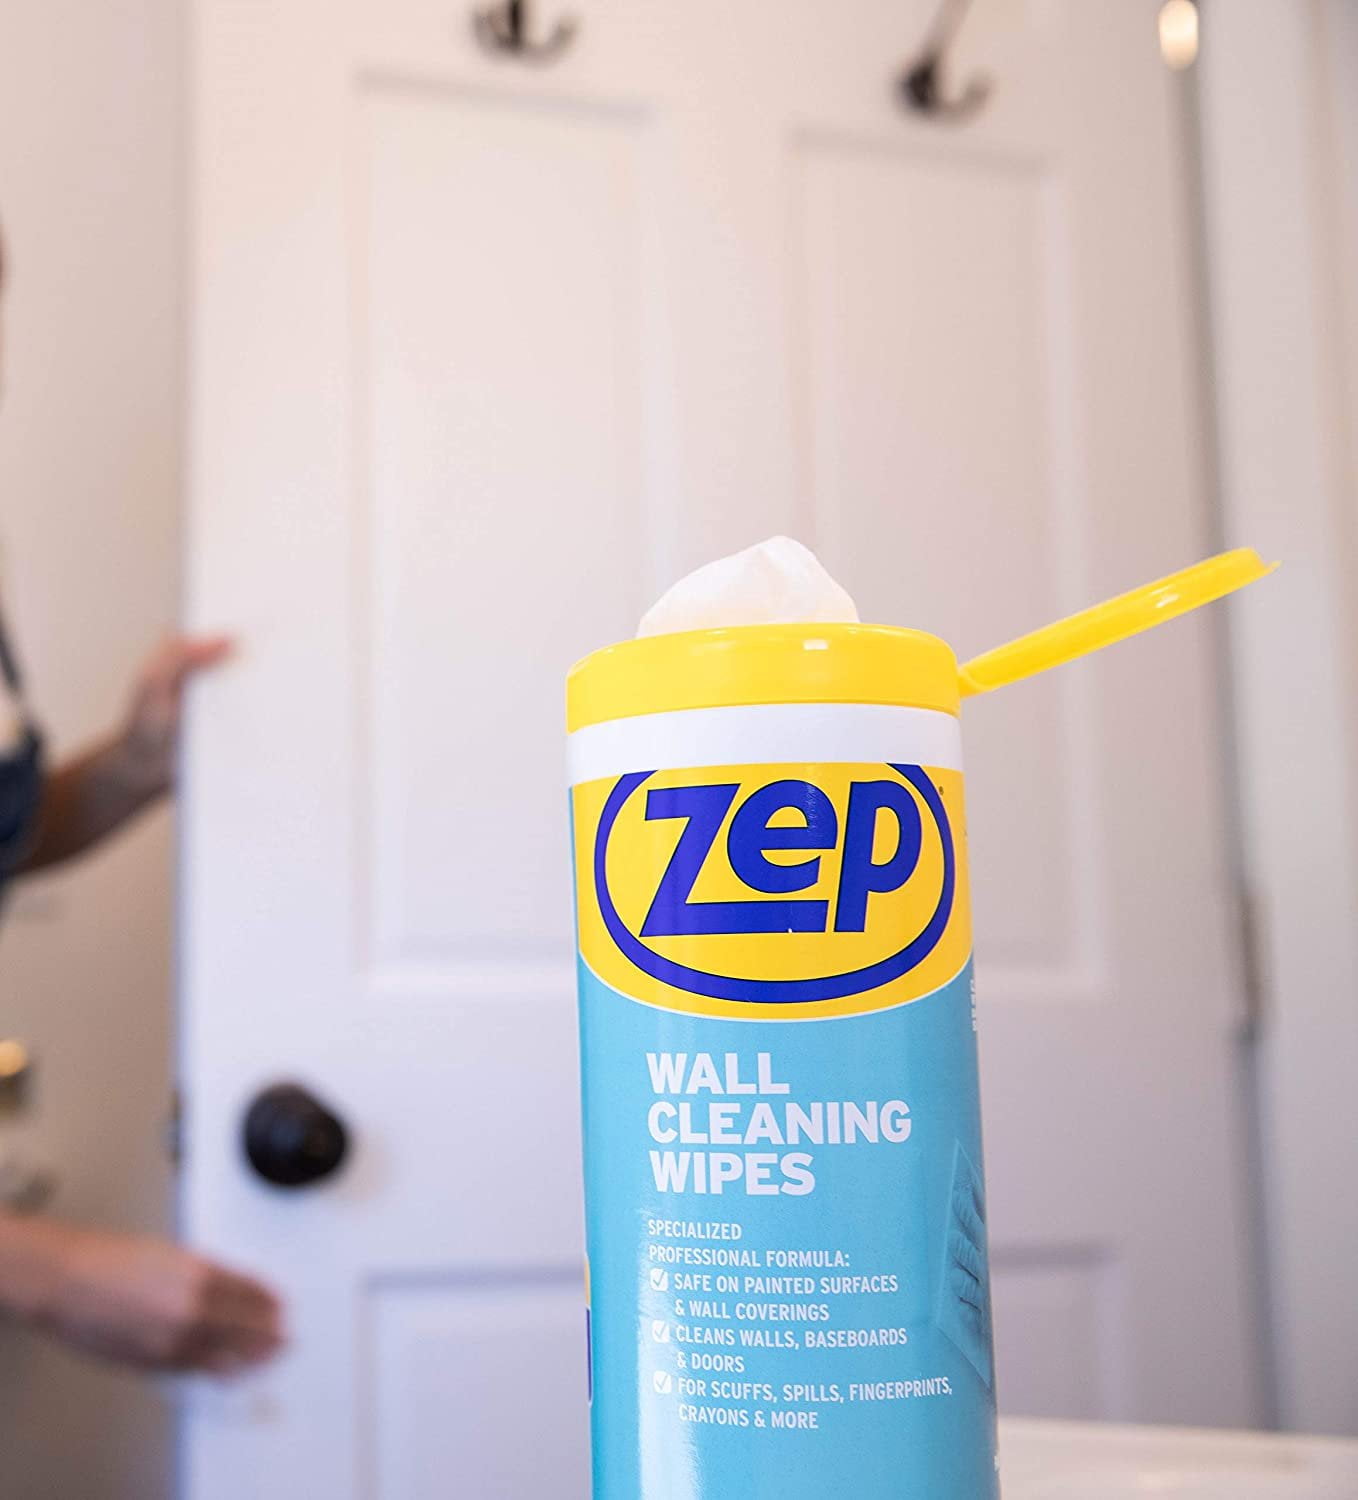 ZEP 40-Count All-Purpose Cleaner Wall Cleaning Wipes R42210 - The Home Depot